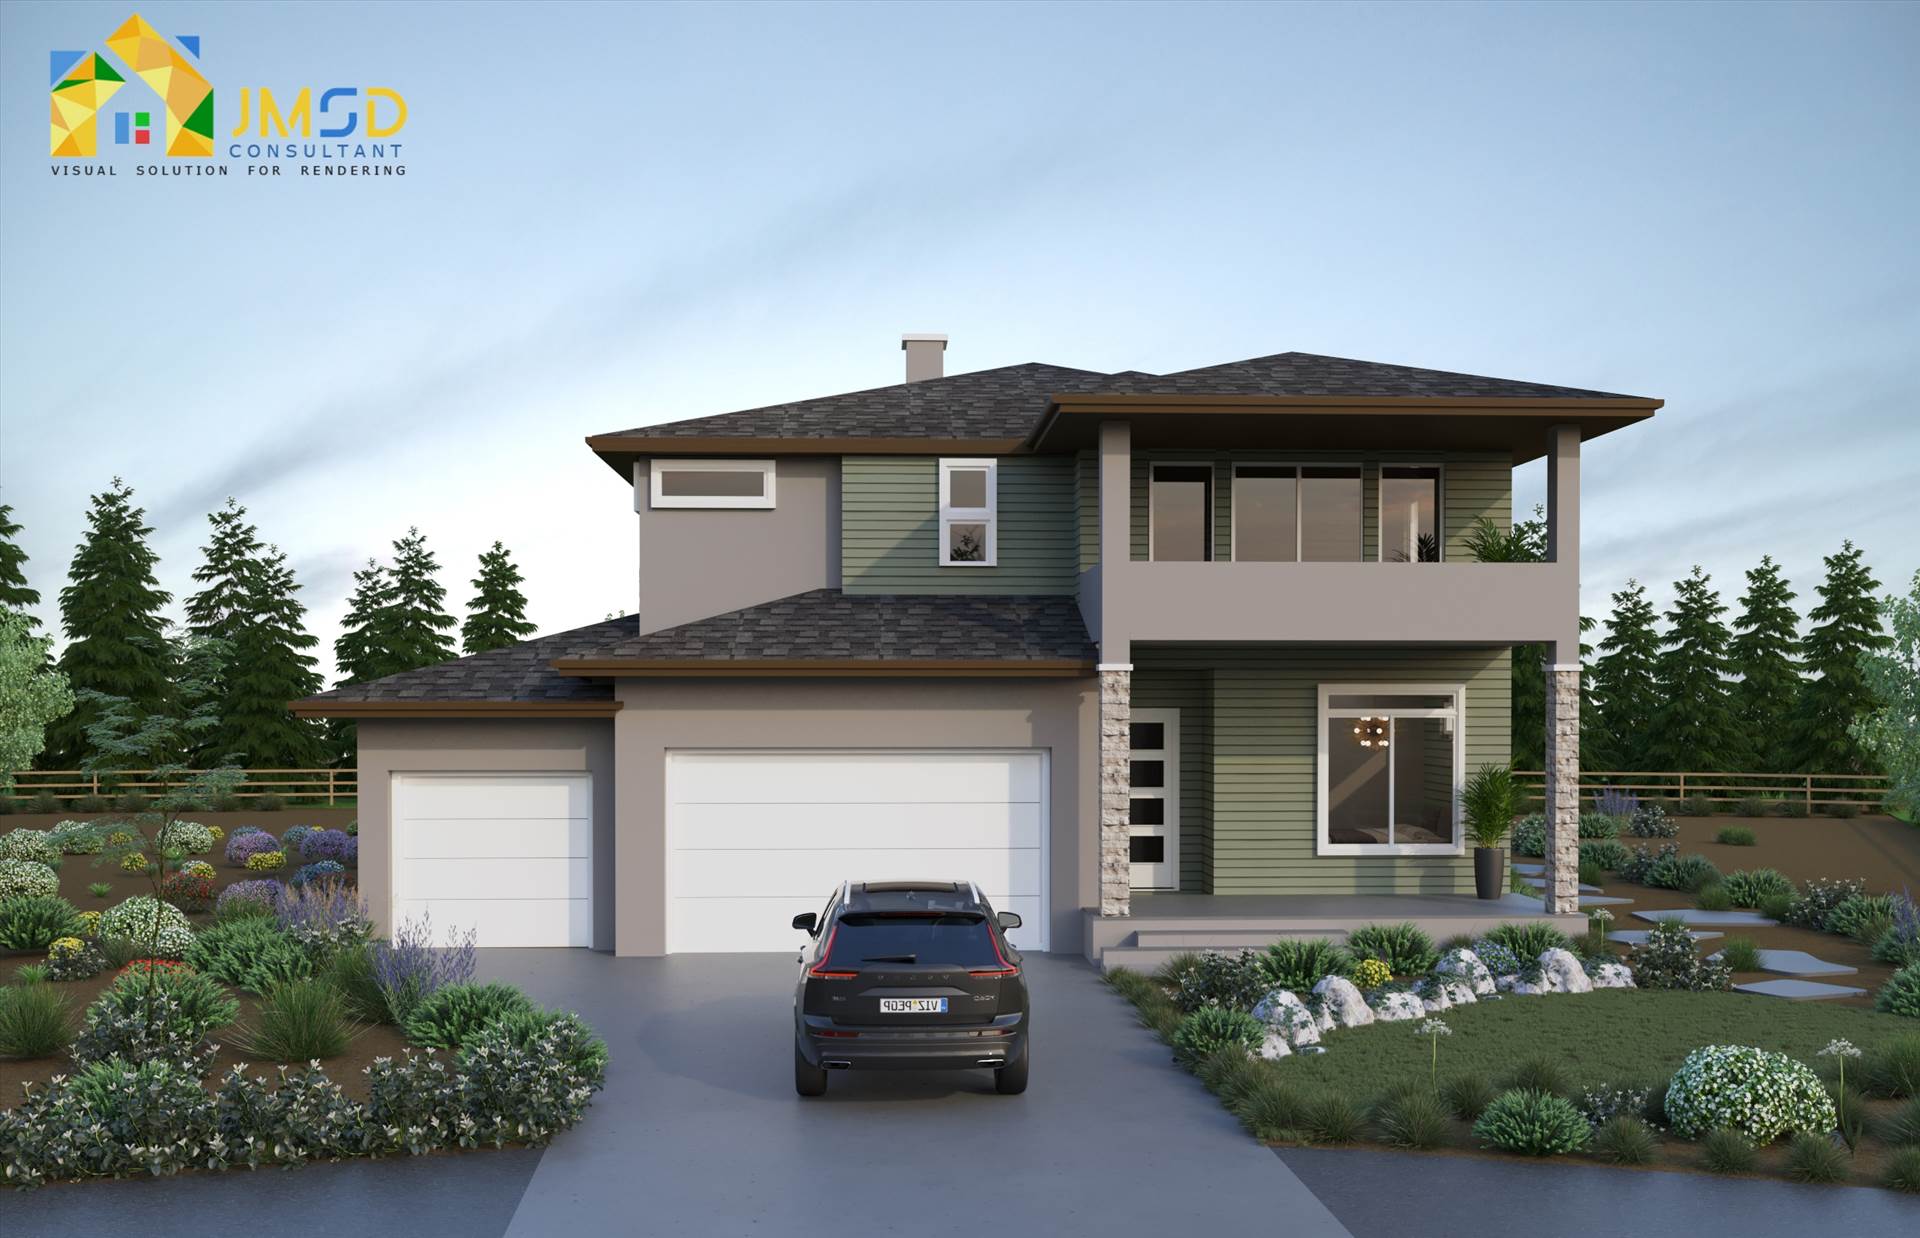 3D Home Rendering Services Colorado Springs Colorado Photorealistic 3D Home Rendering Services, 3D House Rendering Services Bring your exterior designs to life with high quality fidelity Materials and Textures. by JMSDCONSULTANT